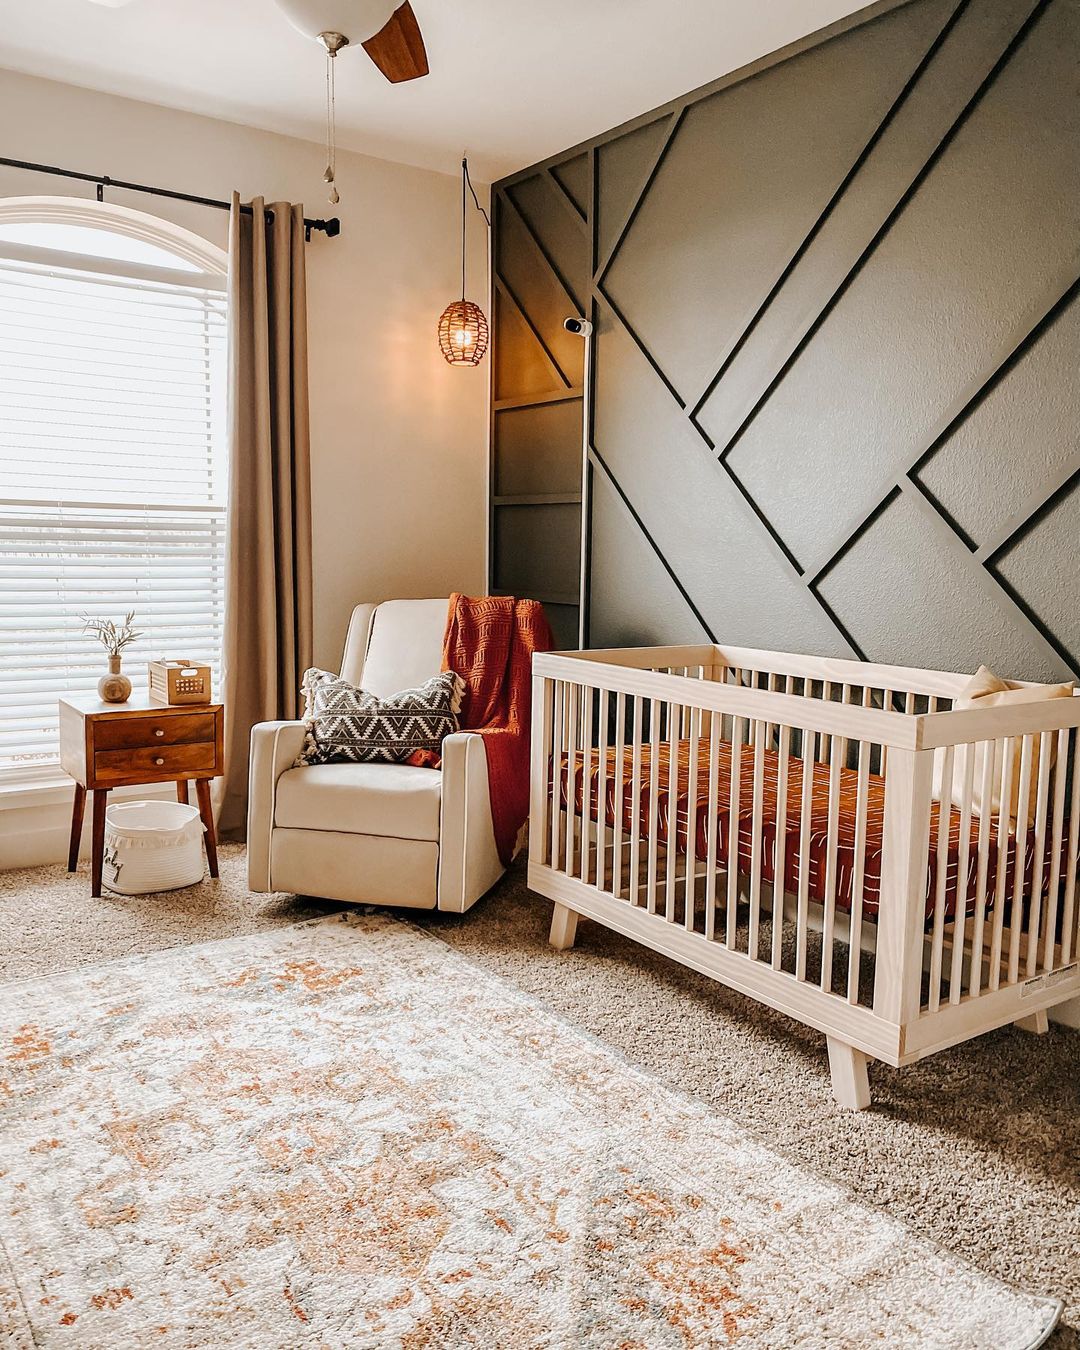 Baby Room Ideas Tips For Designing A Nursery Extra Space Storage